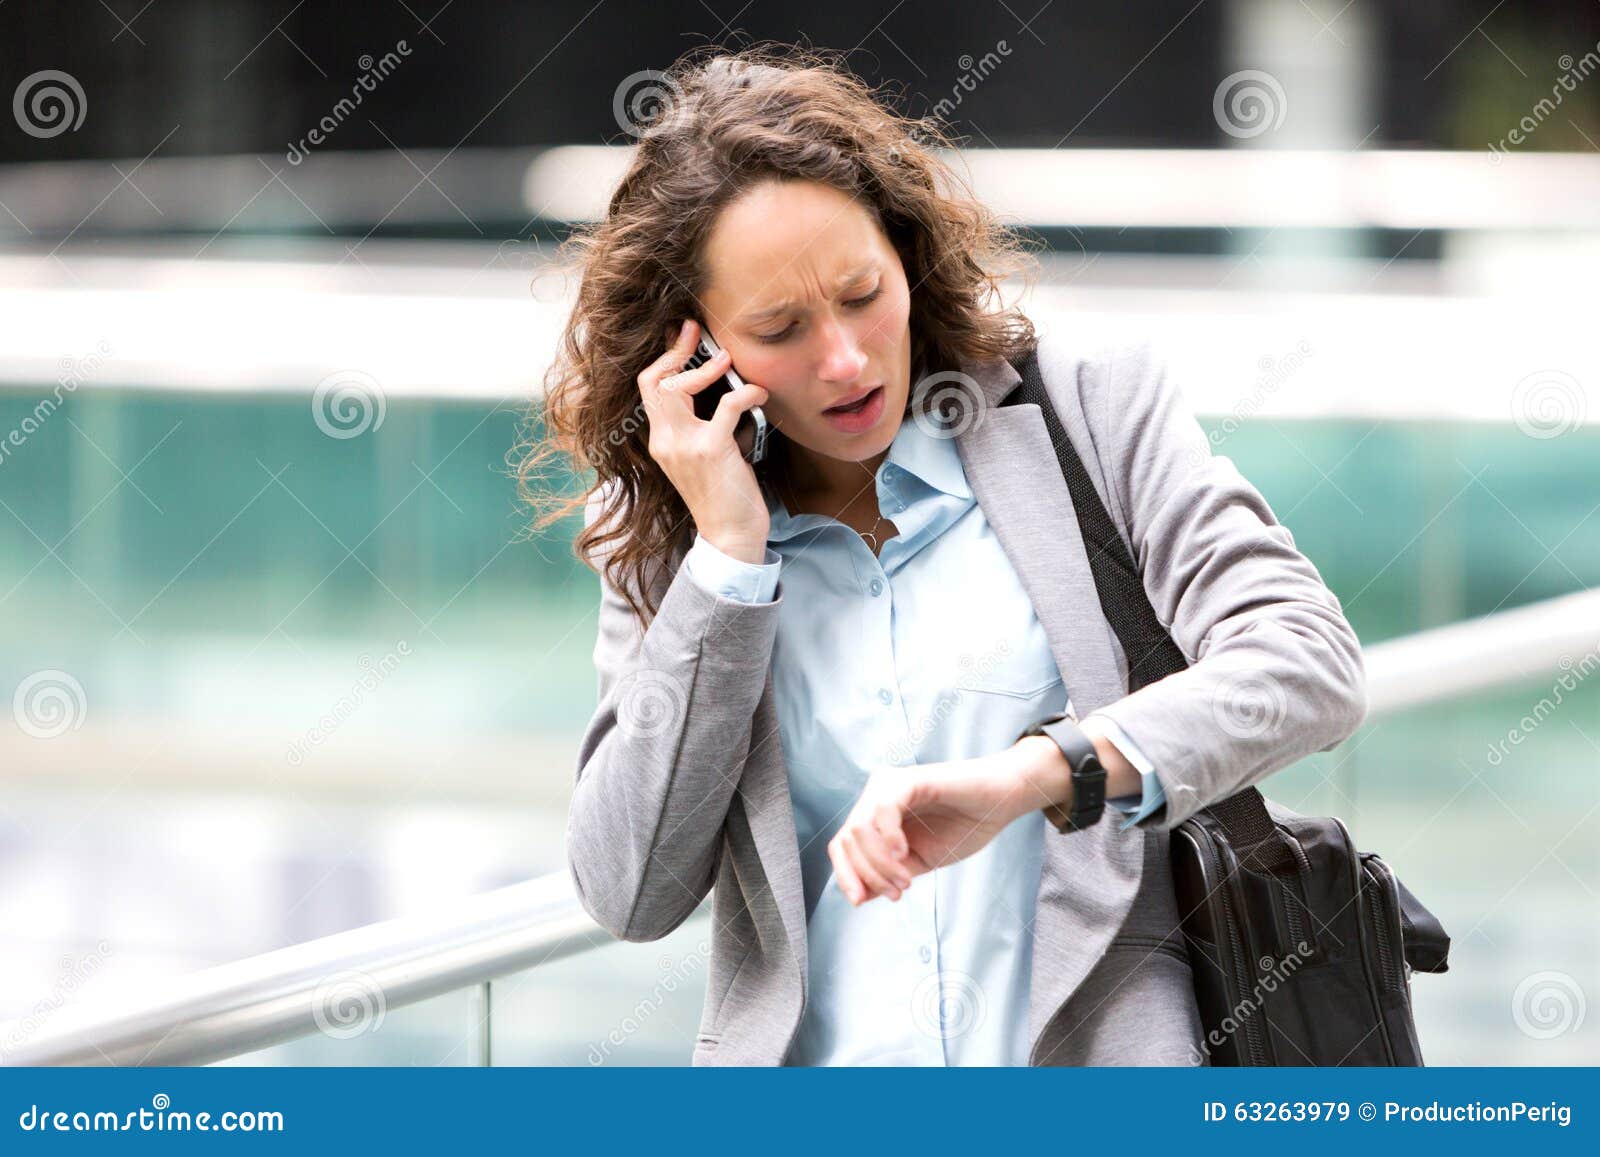 young attractive woman being late to a rendez-vous